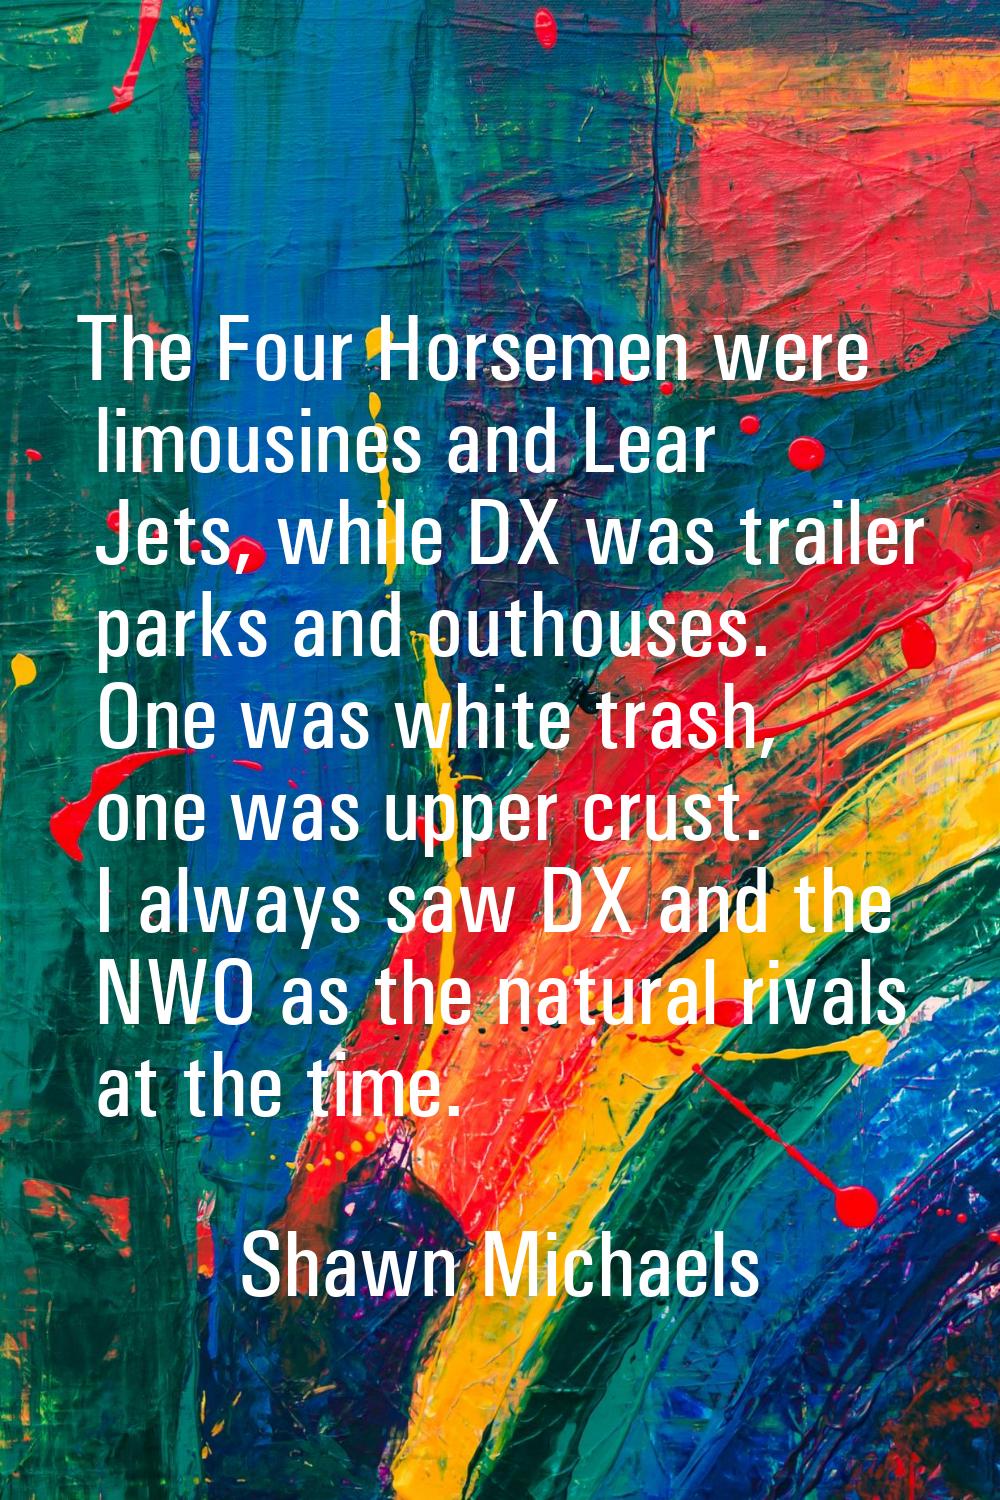 The Four Horsemen were limousines and Lear Jets, while DX was trailer parks and outhouses. One was 